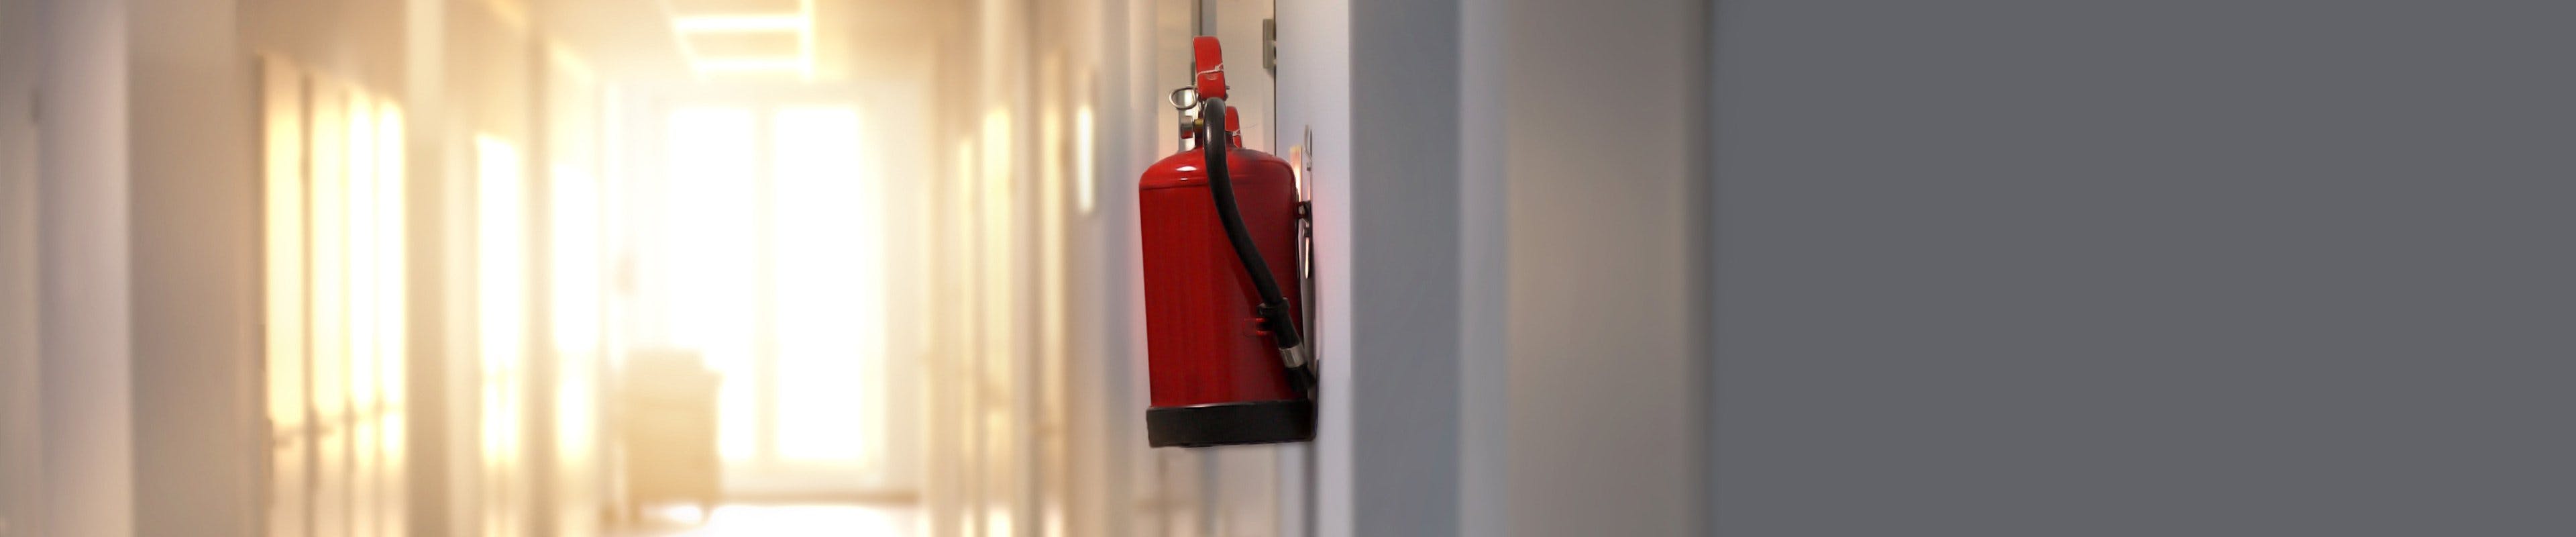 Fire extinguisher in hallway as part of an emergency response plan.